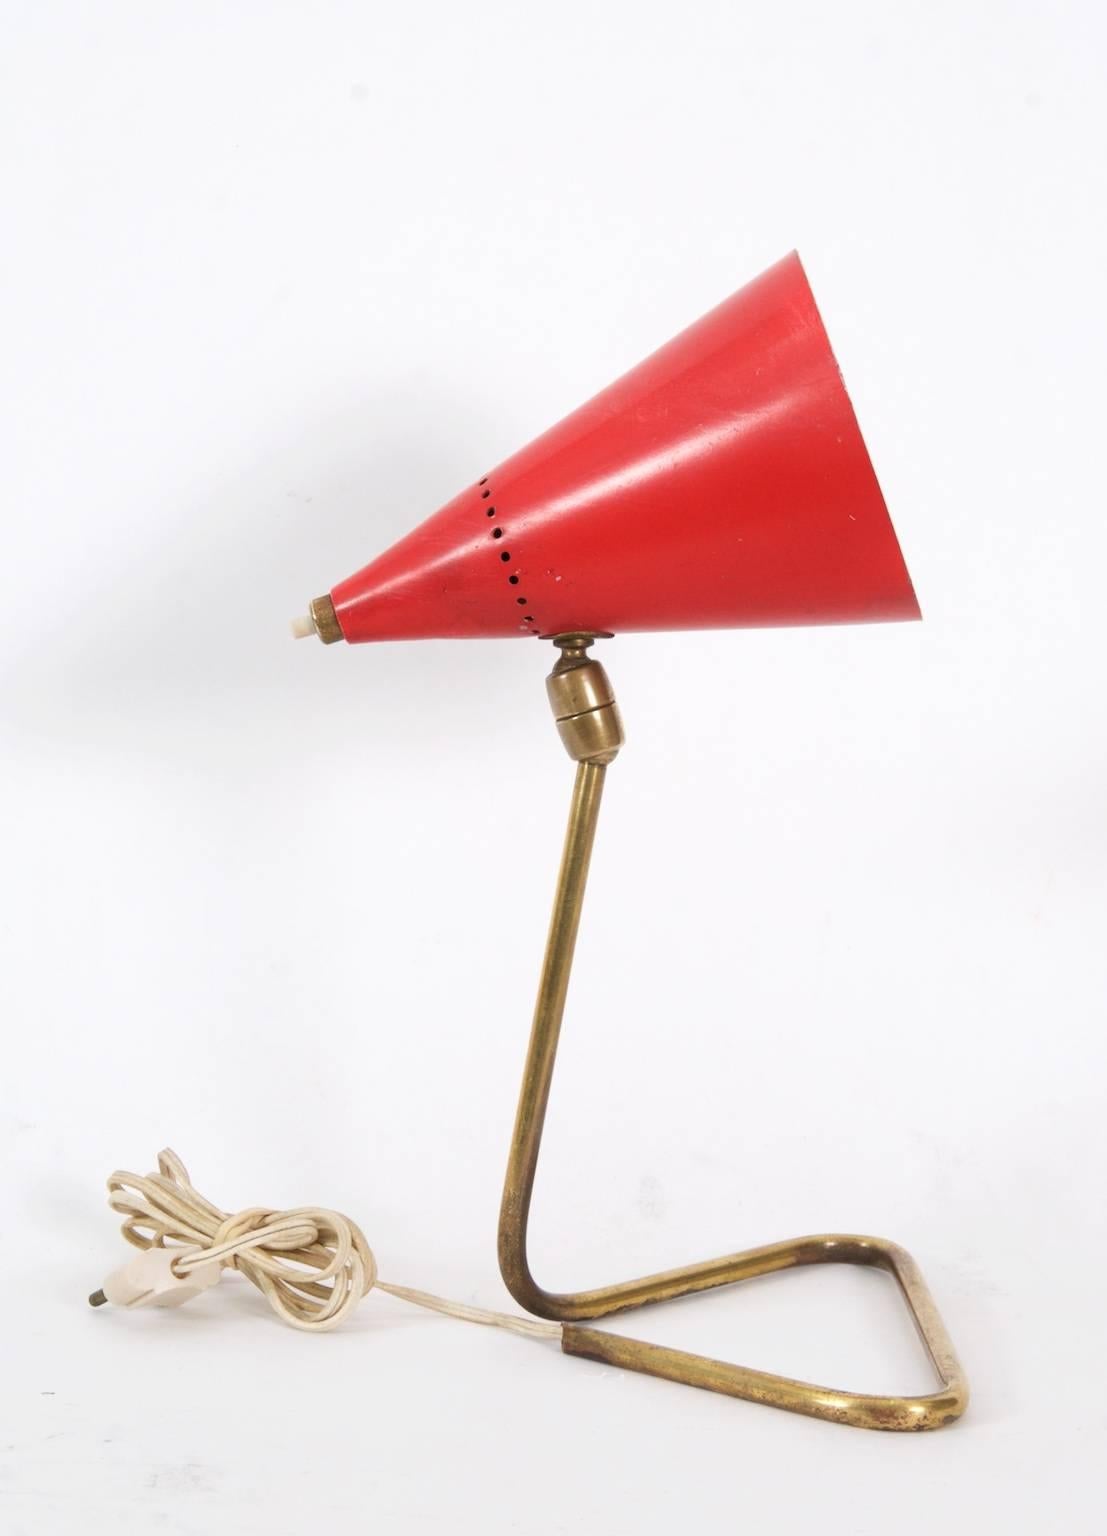 Italian table lamp attributed to Stilnovo, Italy, circa 1950.
Enamelled red cone shade with press button switch mounted on a brass tubular base connected by a double ball joint. Original wiring present, in working condition, should be rewired if